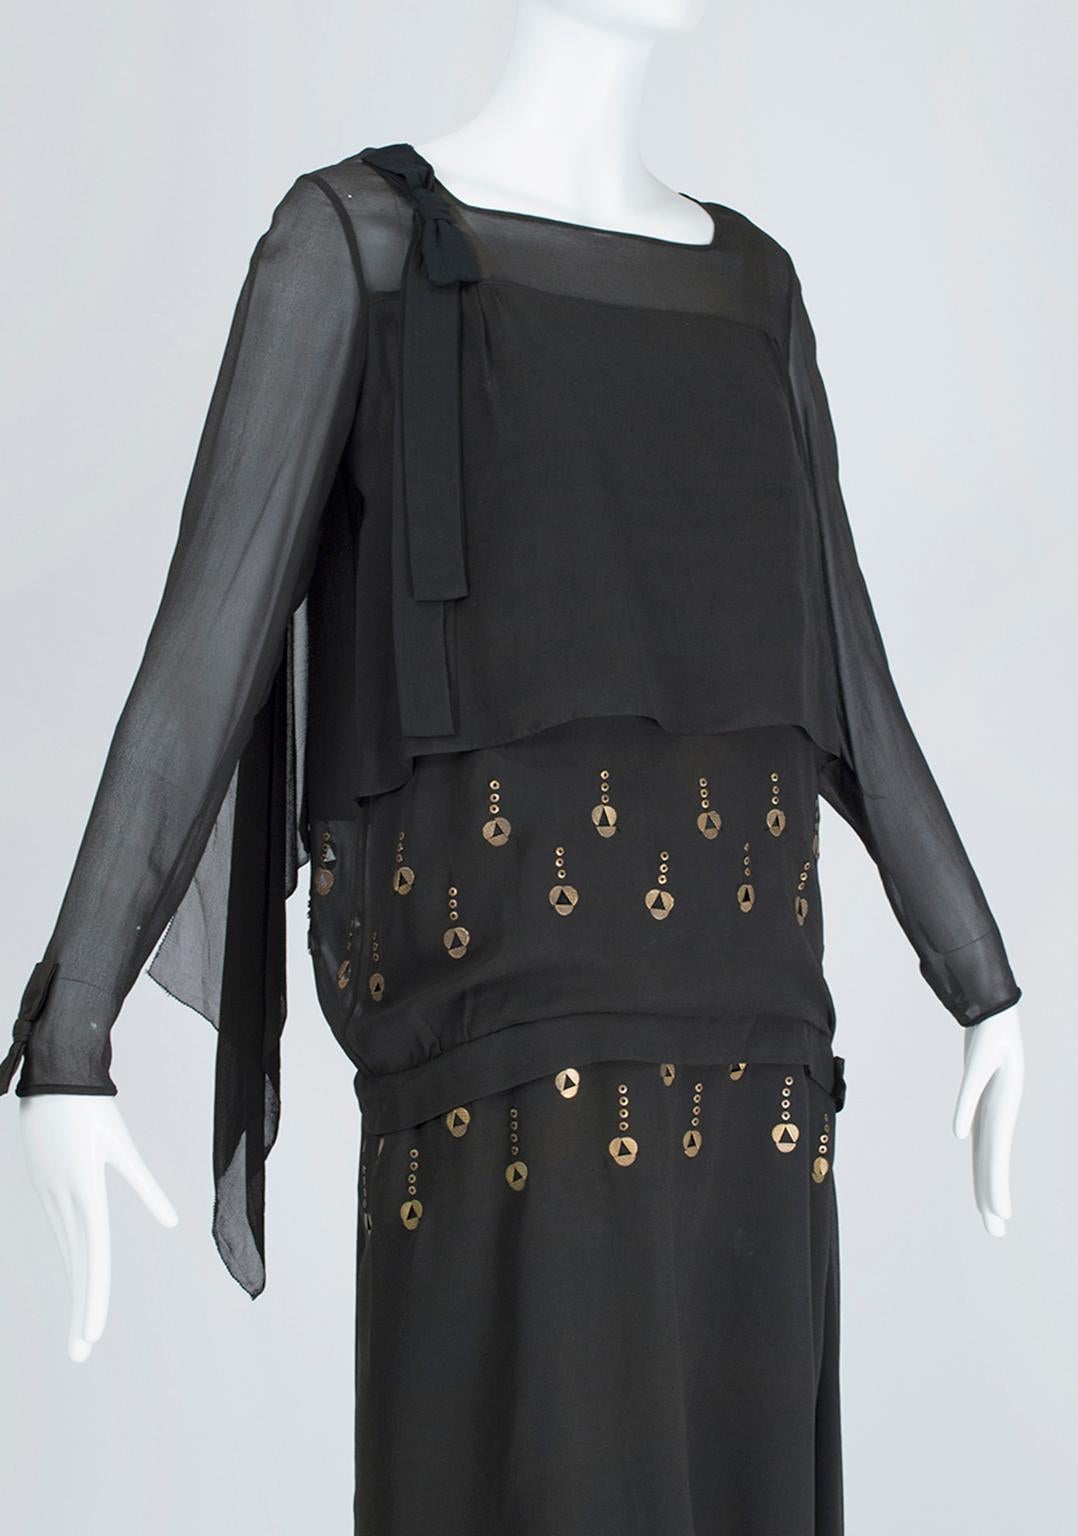 Black Egyptian Revival Deco Blouson Dress with Punched Brass Eyelets - S, 1924 In Good Condition For Sale In Tucson, AZ